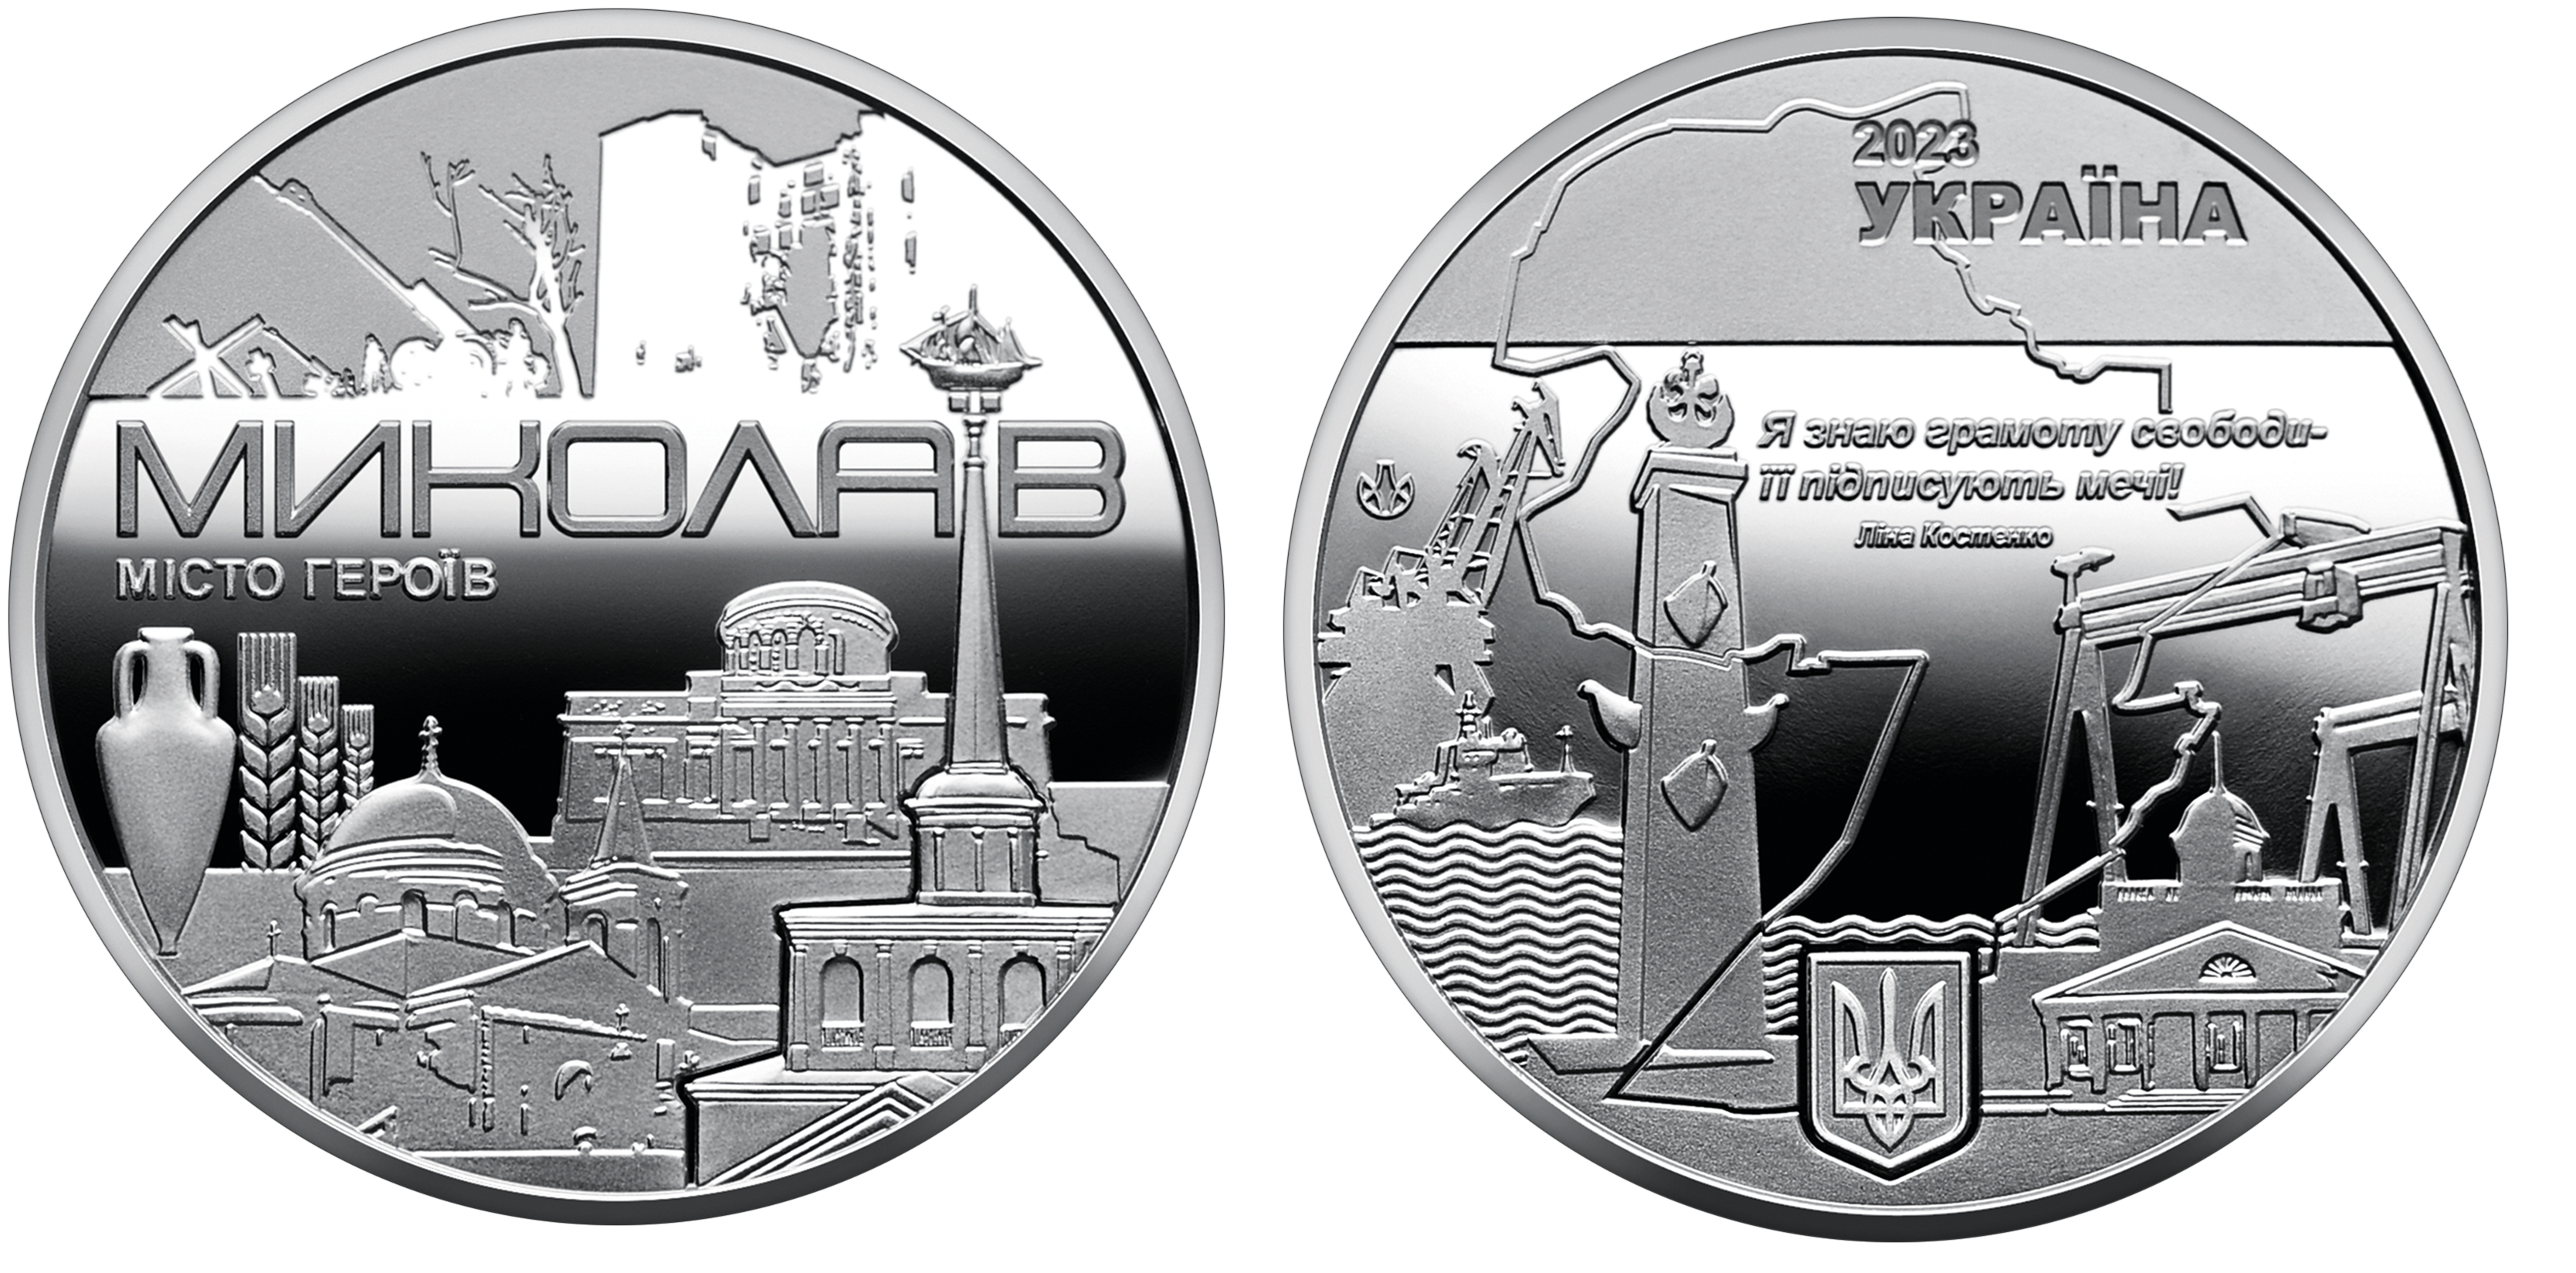 Sale of commemorative coins from MTB BANK • buy commemorative coins in Ukraine at MTB BANK - photo 9 - mtb.ua